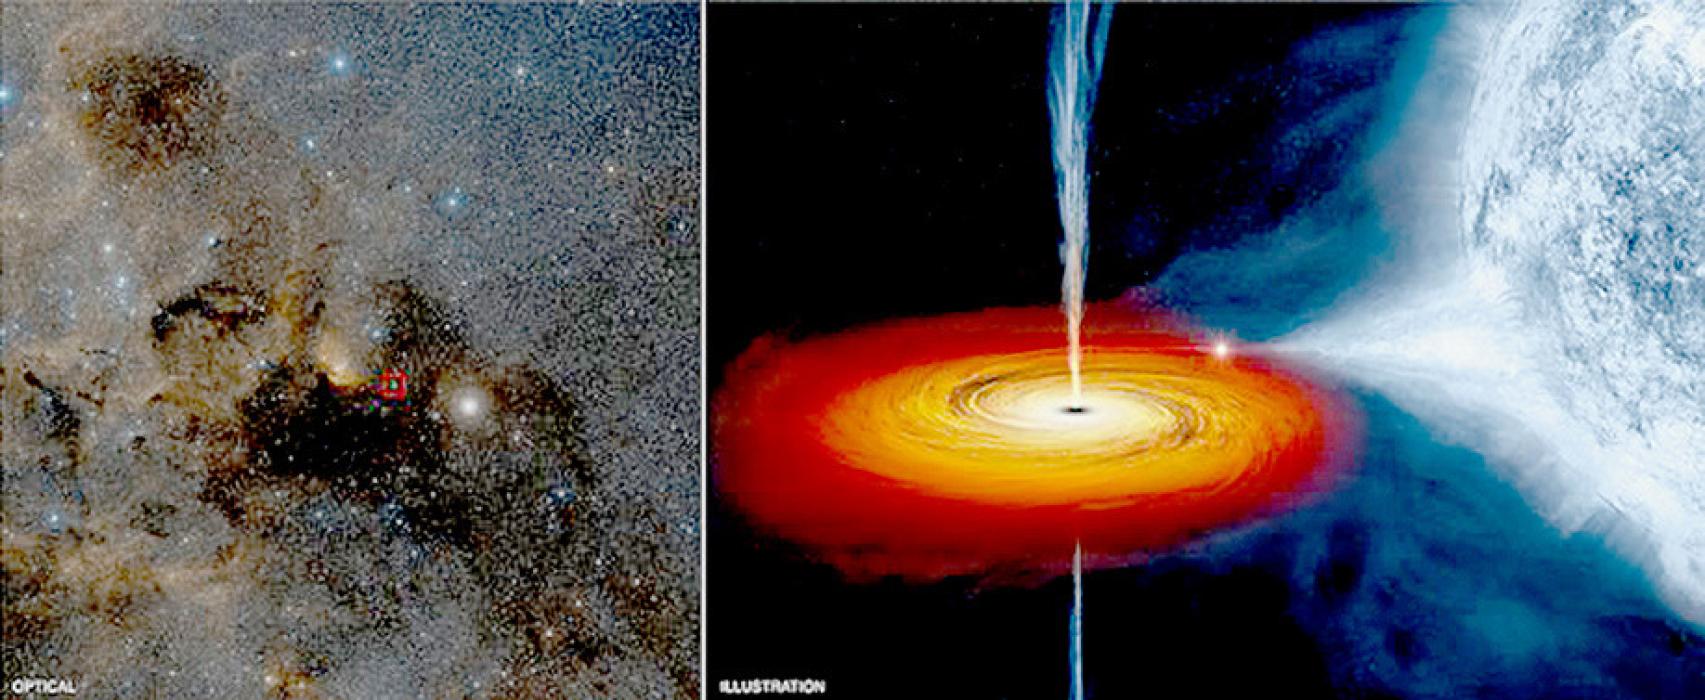 While the black hole Cygnus x-1 is invisible with even the most powerful Optical telescope, in X-ray, it shines brightly. On the left is the optical view of that region with the location of Cygnus x-1 shown in the red box as taken by the Digitized Sky Survey. On the right is an artist’s conception of the black hole pulling material from its massive blue companion star. (Credit: NASA/CXC chandra.harvard.edu/photo/2011/cygx1/)